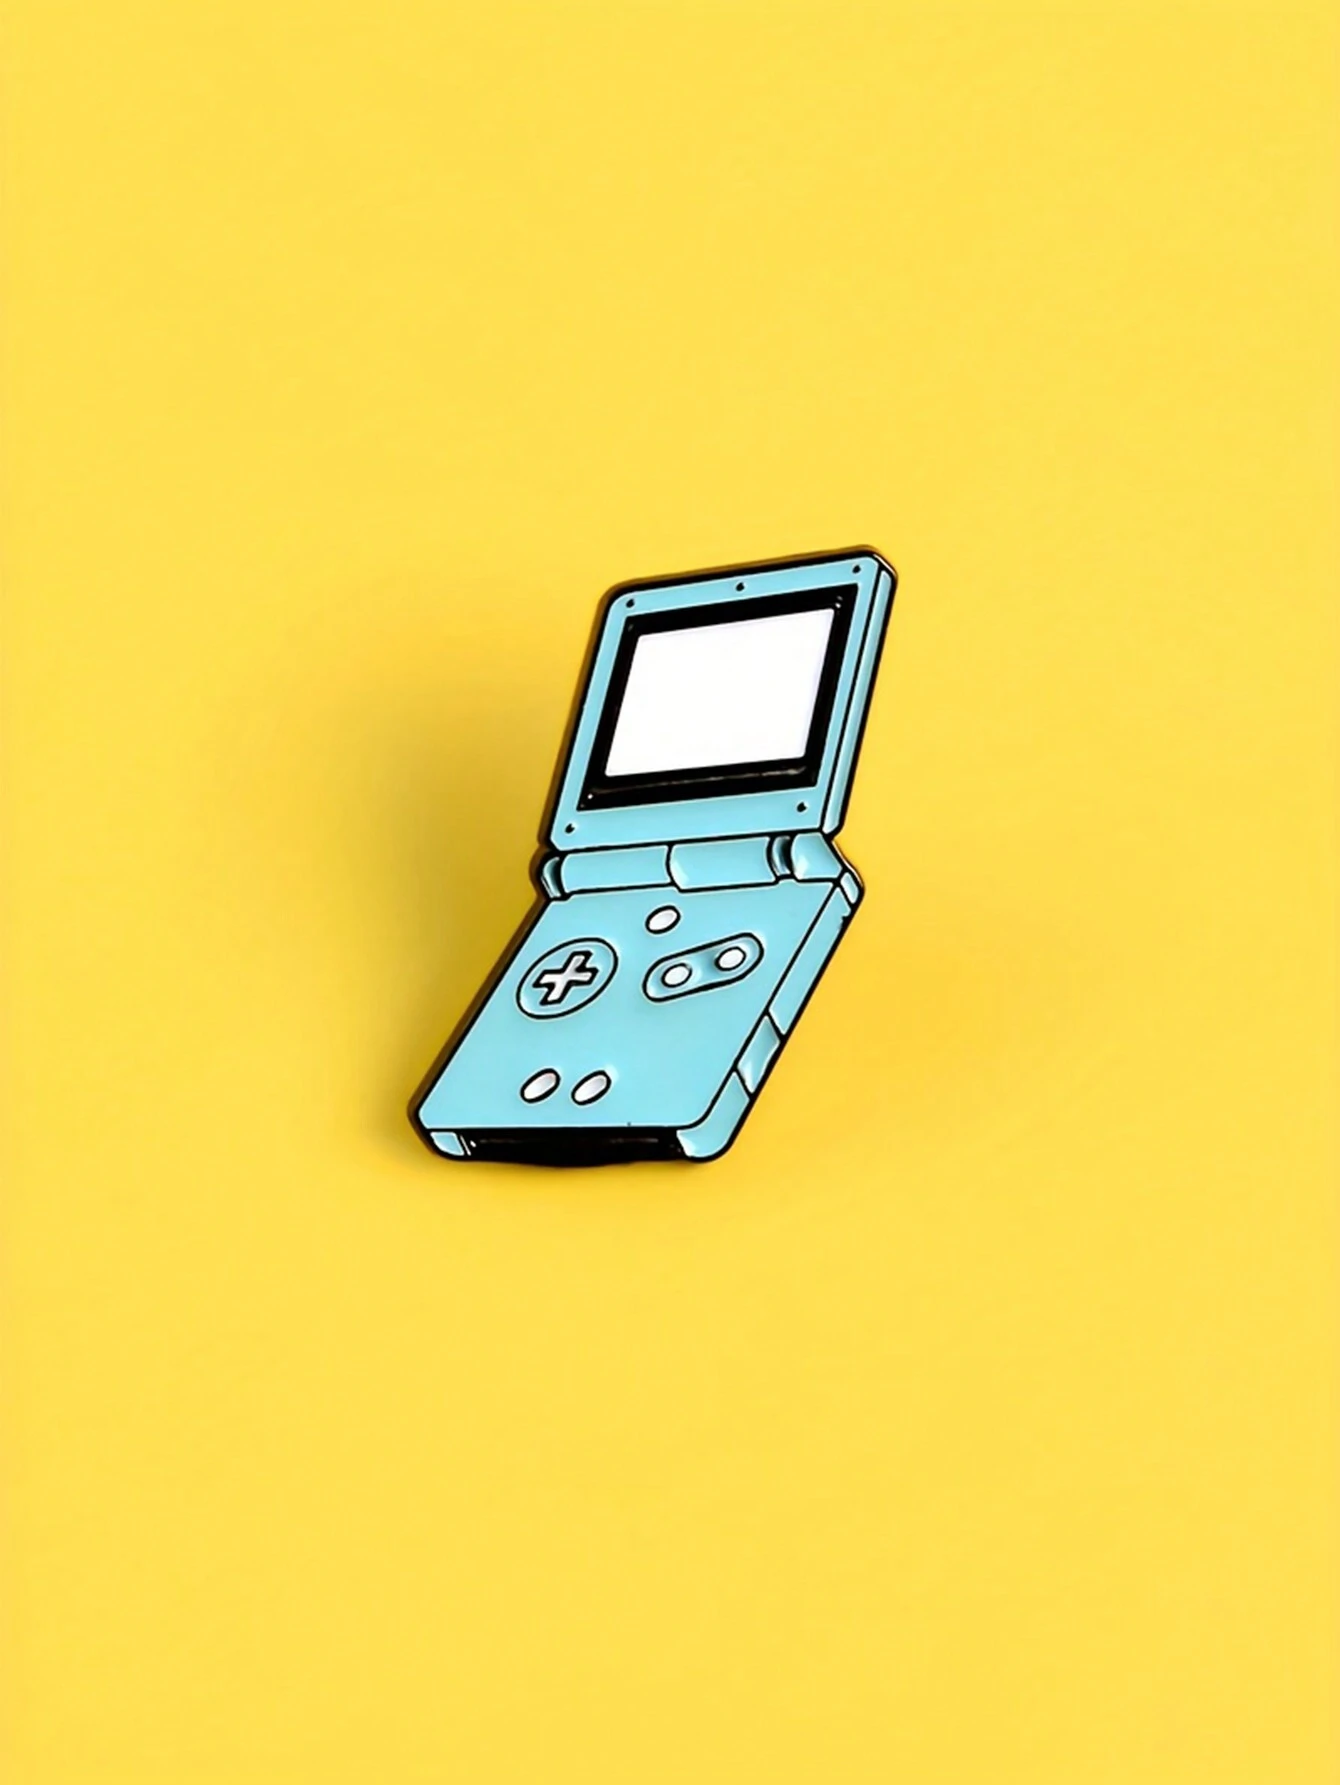 A cute blue and black Nintendo Gameboy Advance soft enamel pin on a yellow background - Game Boy